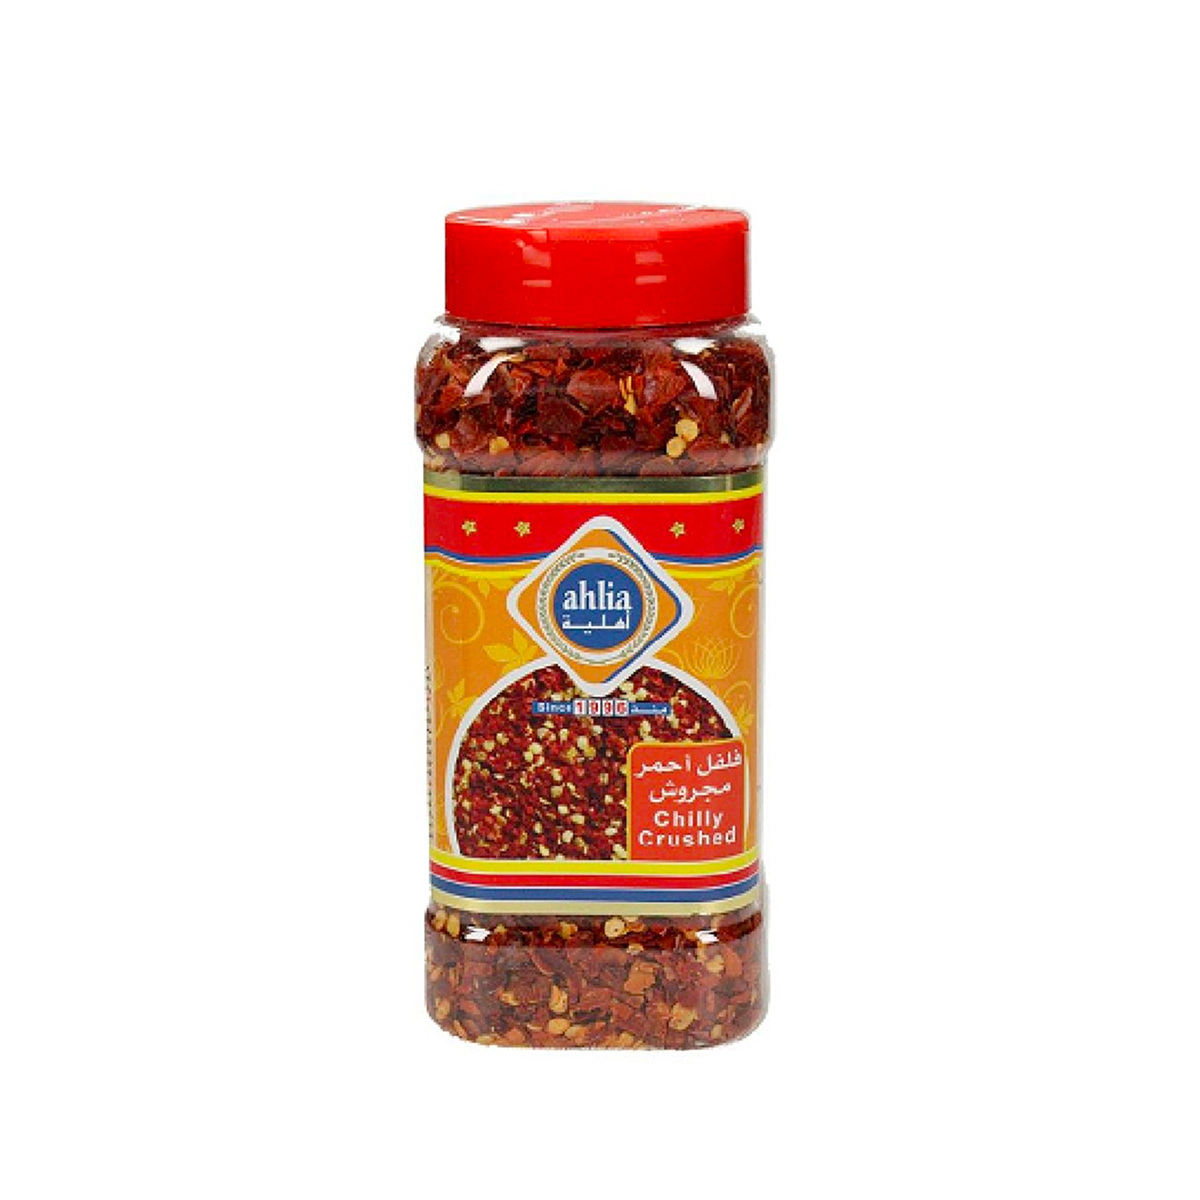 Ahlia Crushed Chilli Value Pack 180g